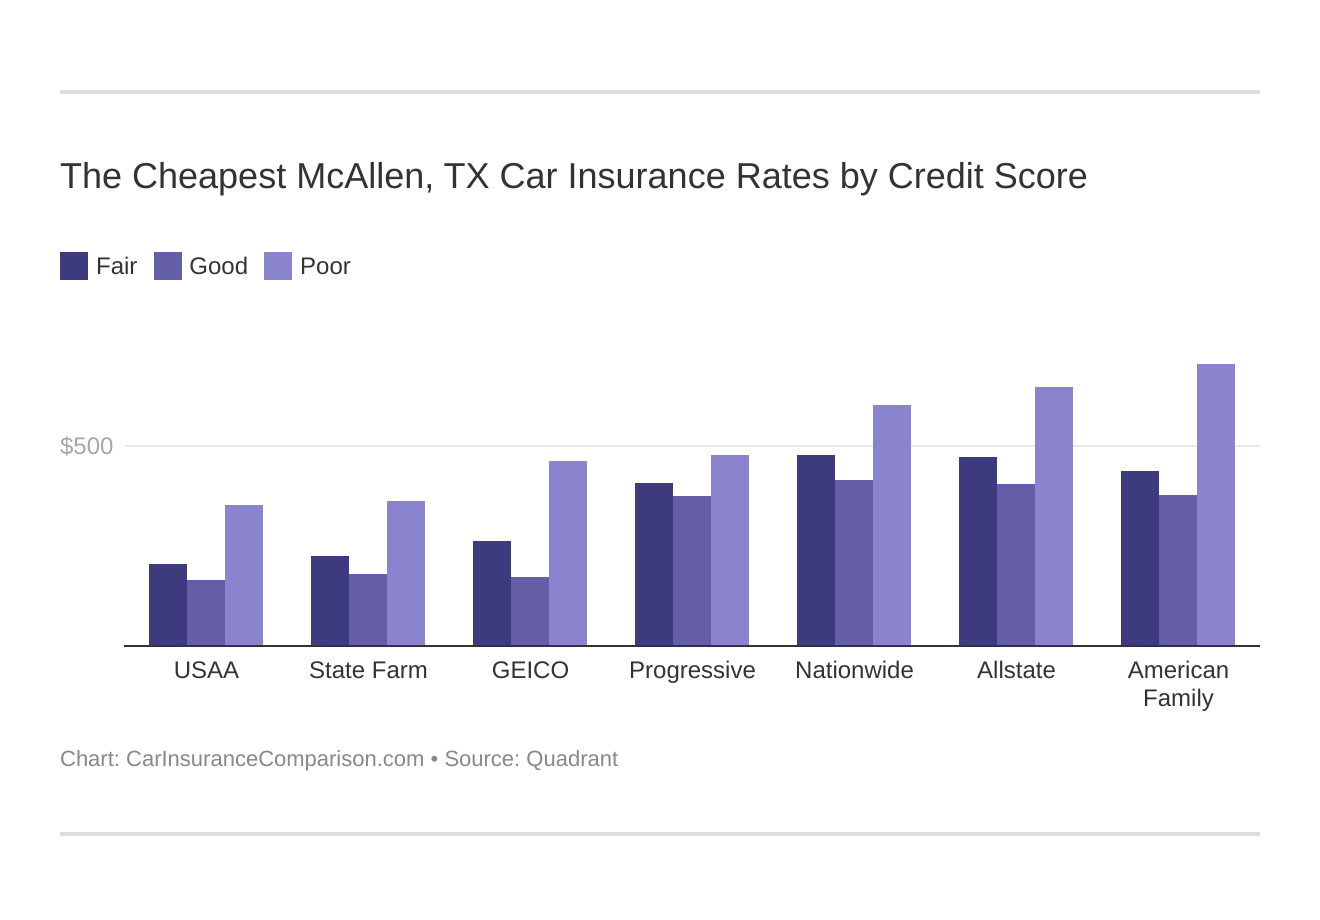 The Cheapest McAllen, TX Car Insurance Rates by Credit Score